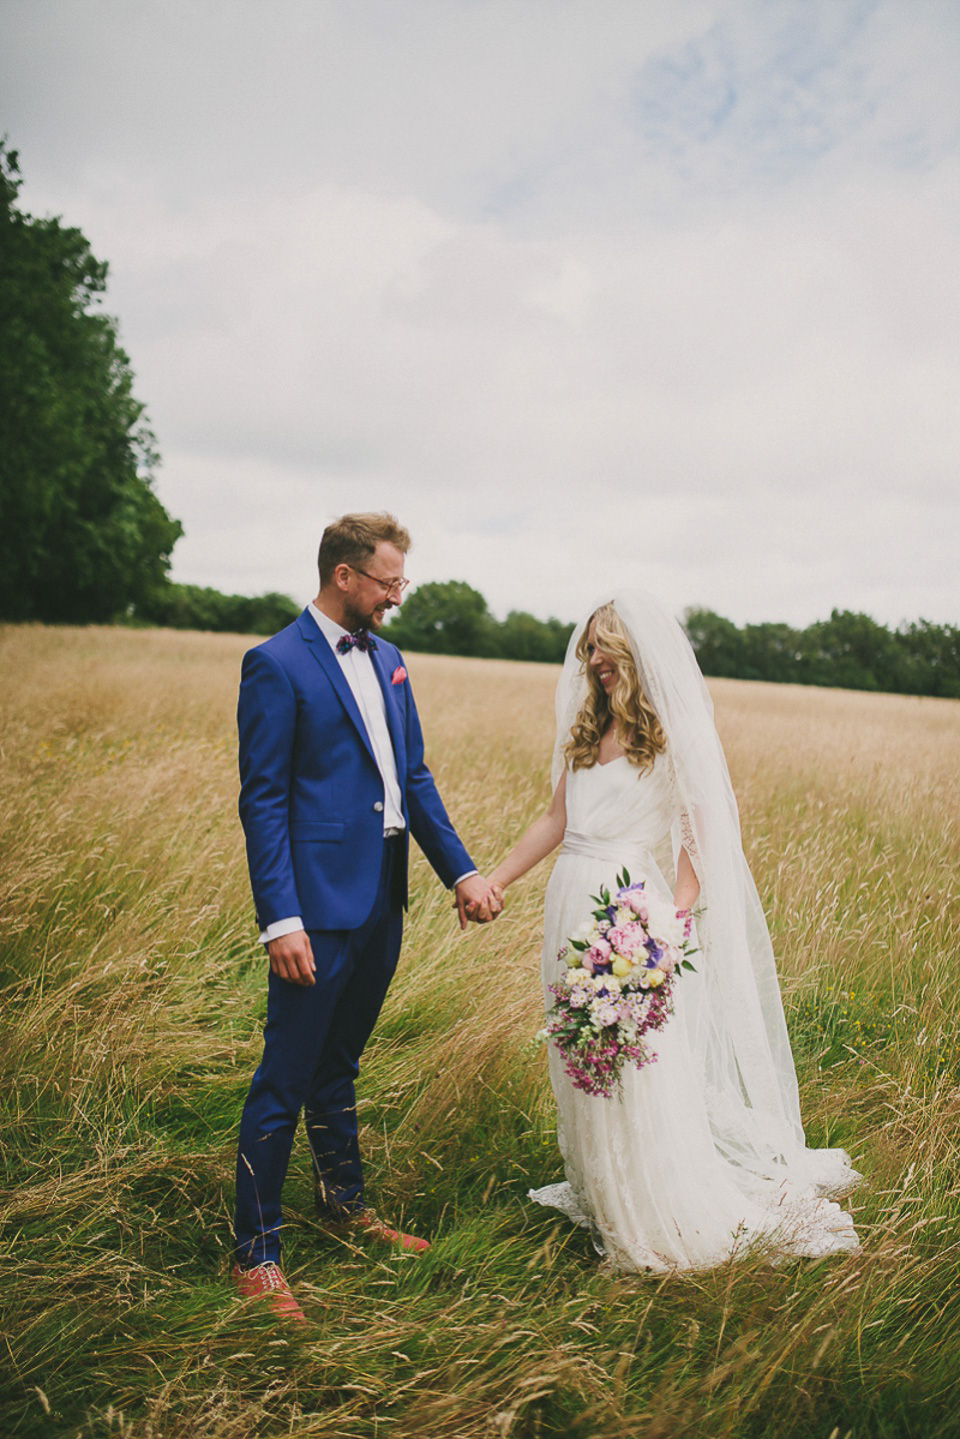 A boho bride wearing a Charlie Brear dress and veil for her woodland festival wedding at Hawthbush Farm in Sussex. Photography by Modern Vintage Weddings.